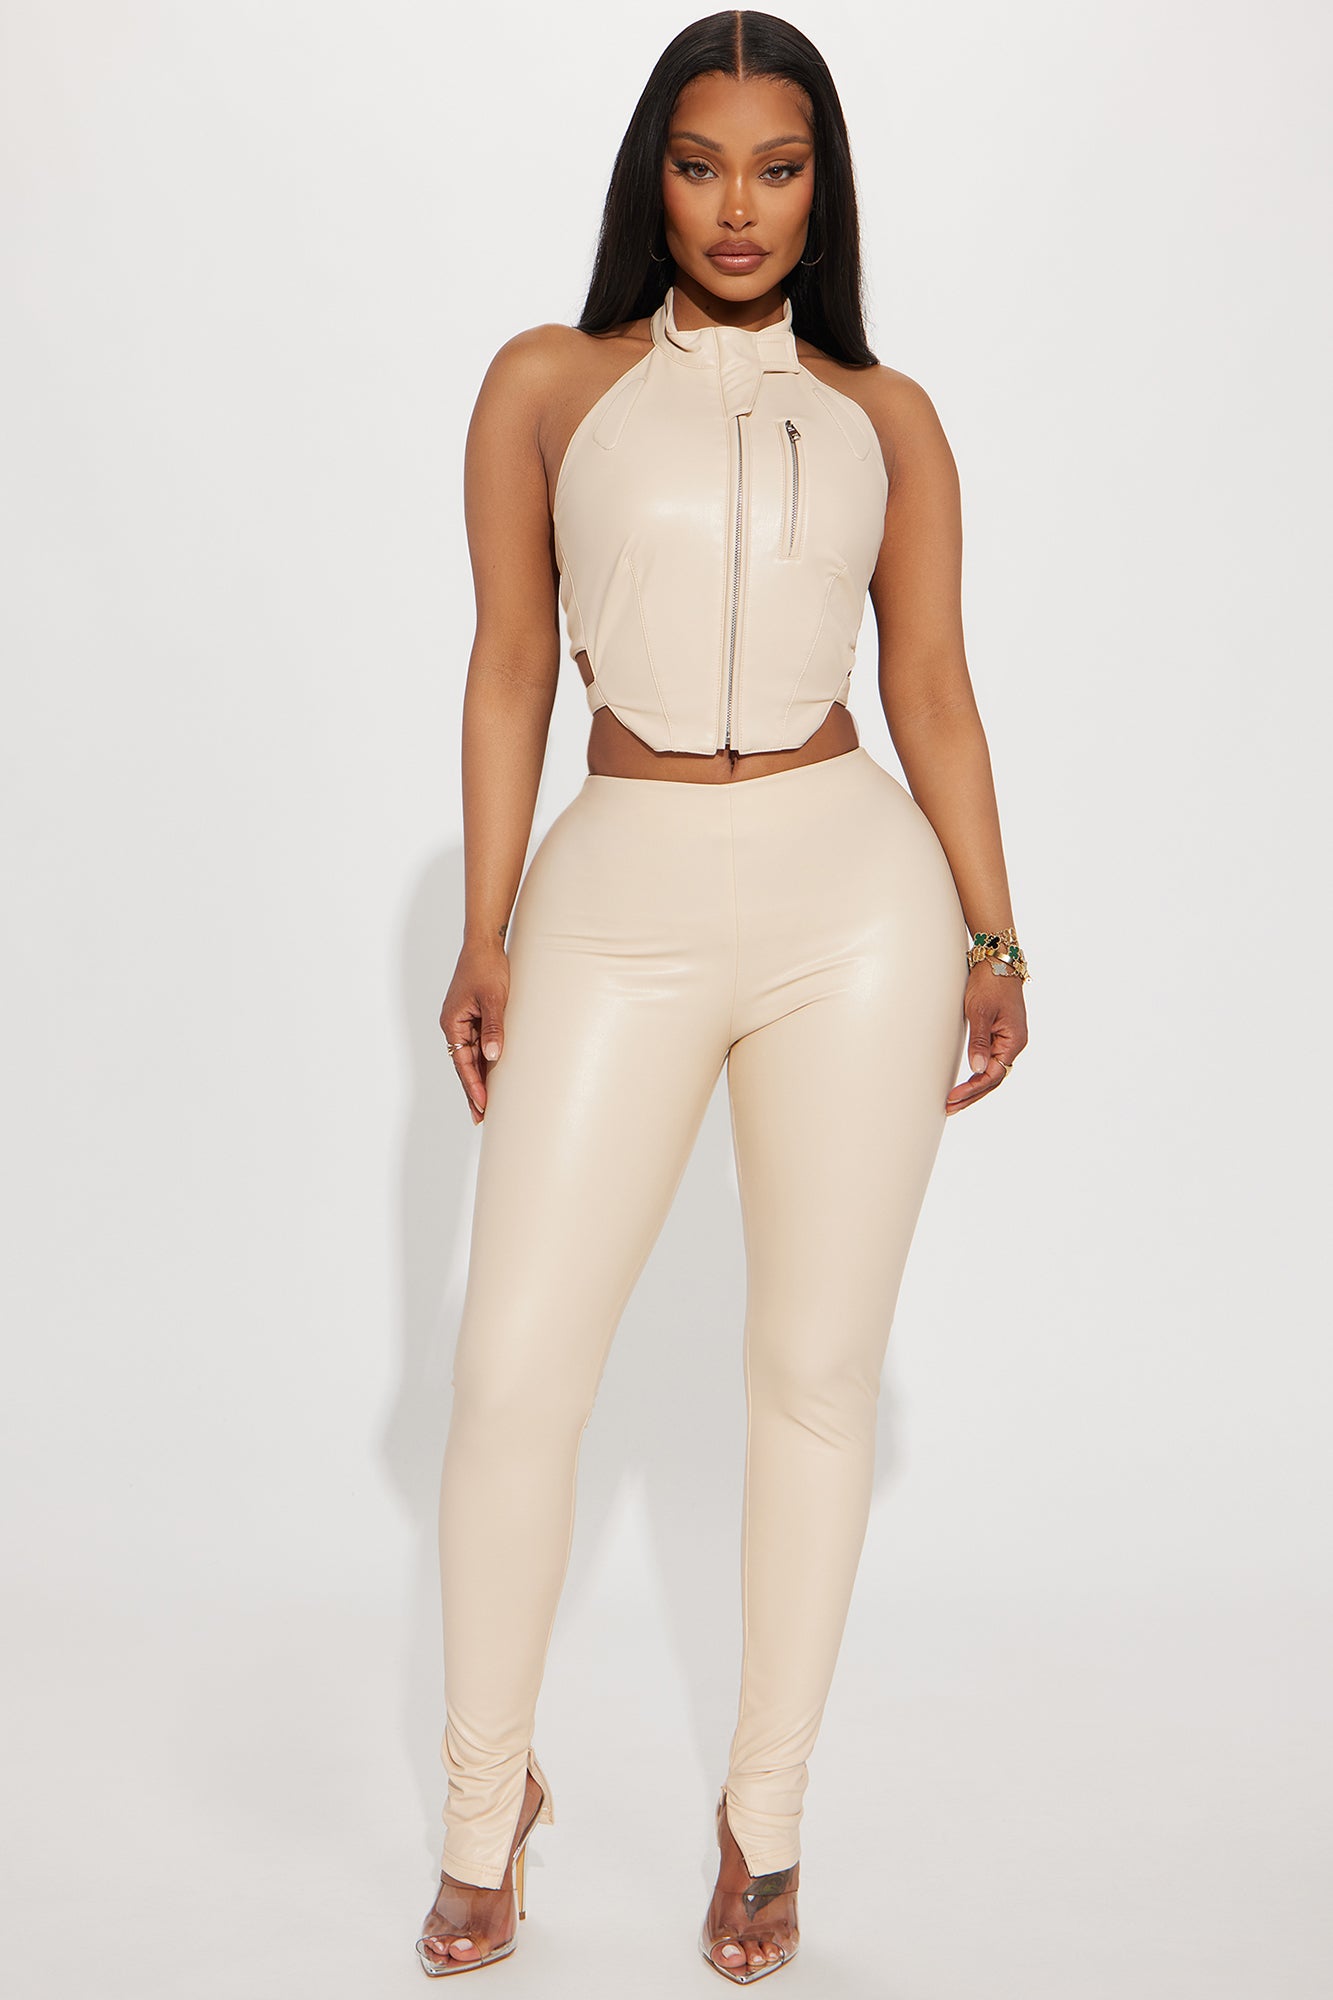 In The Moonlight Faux Leather Legging Set - Cream